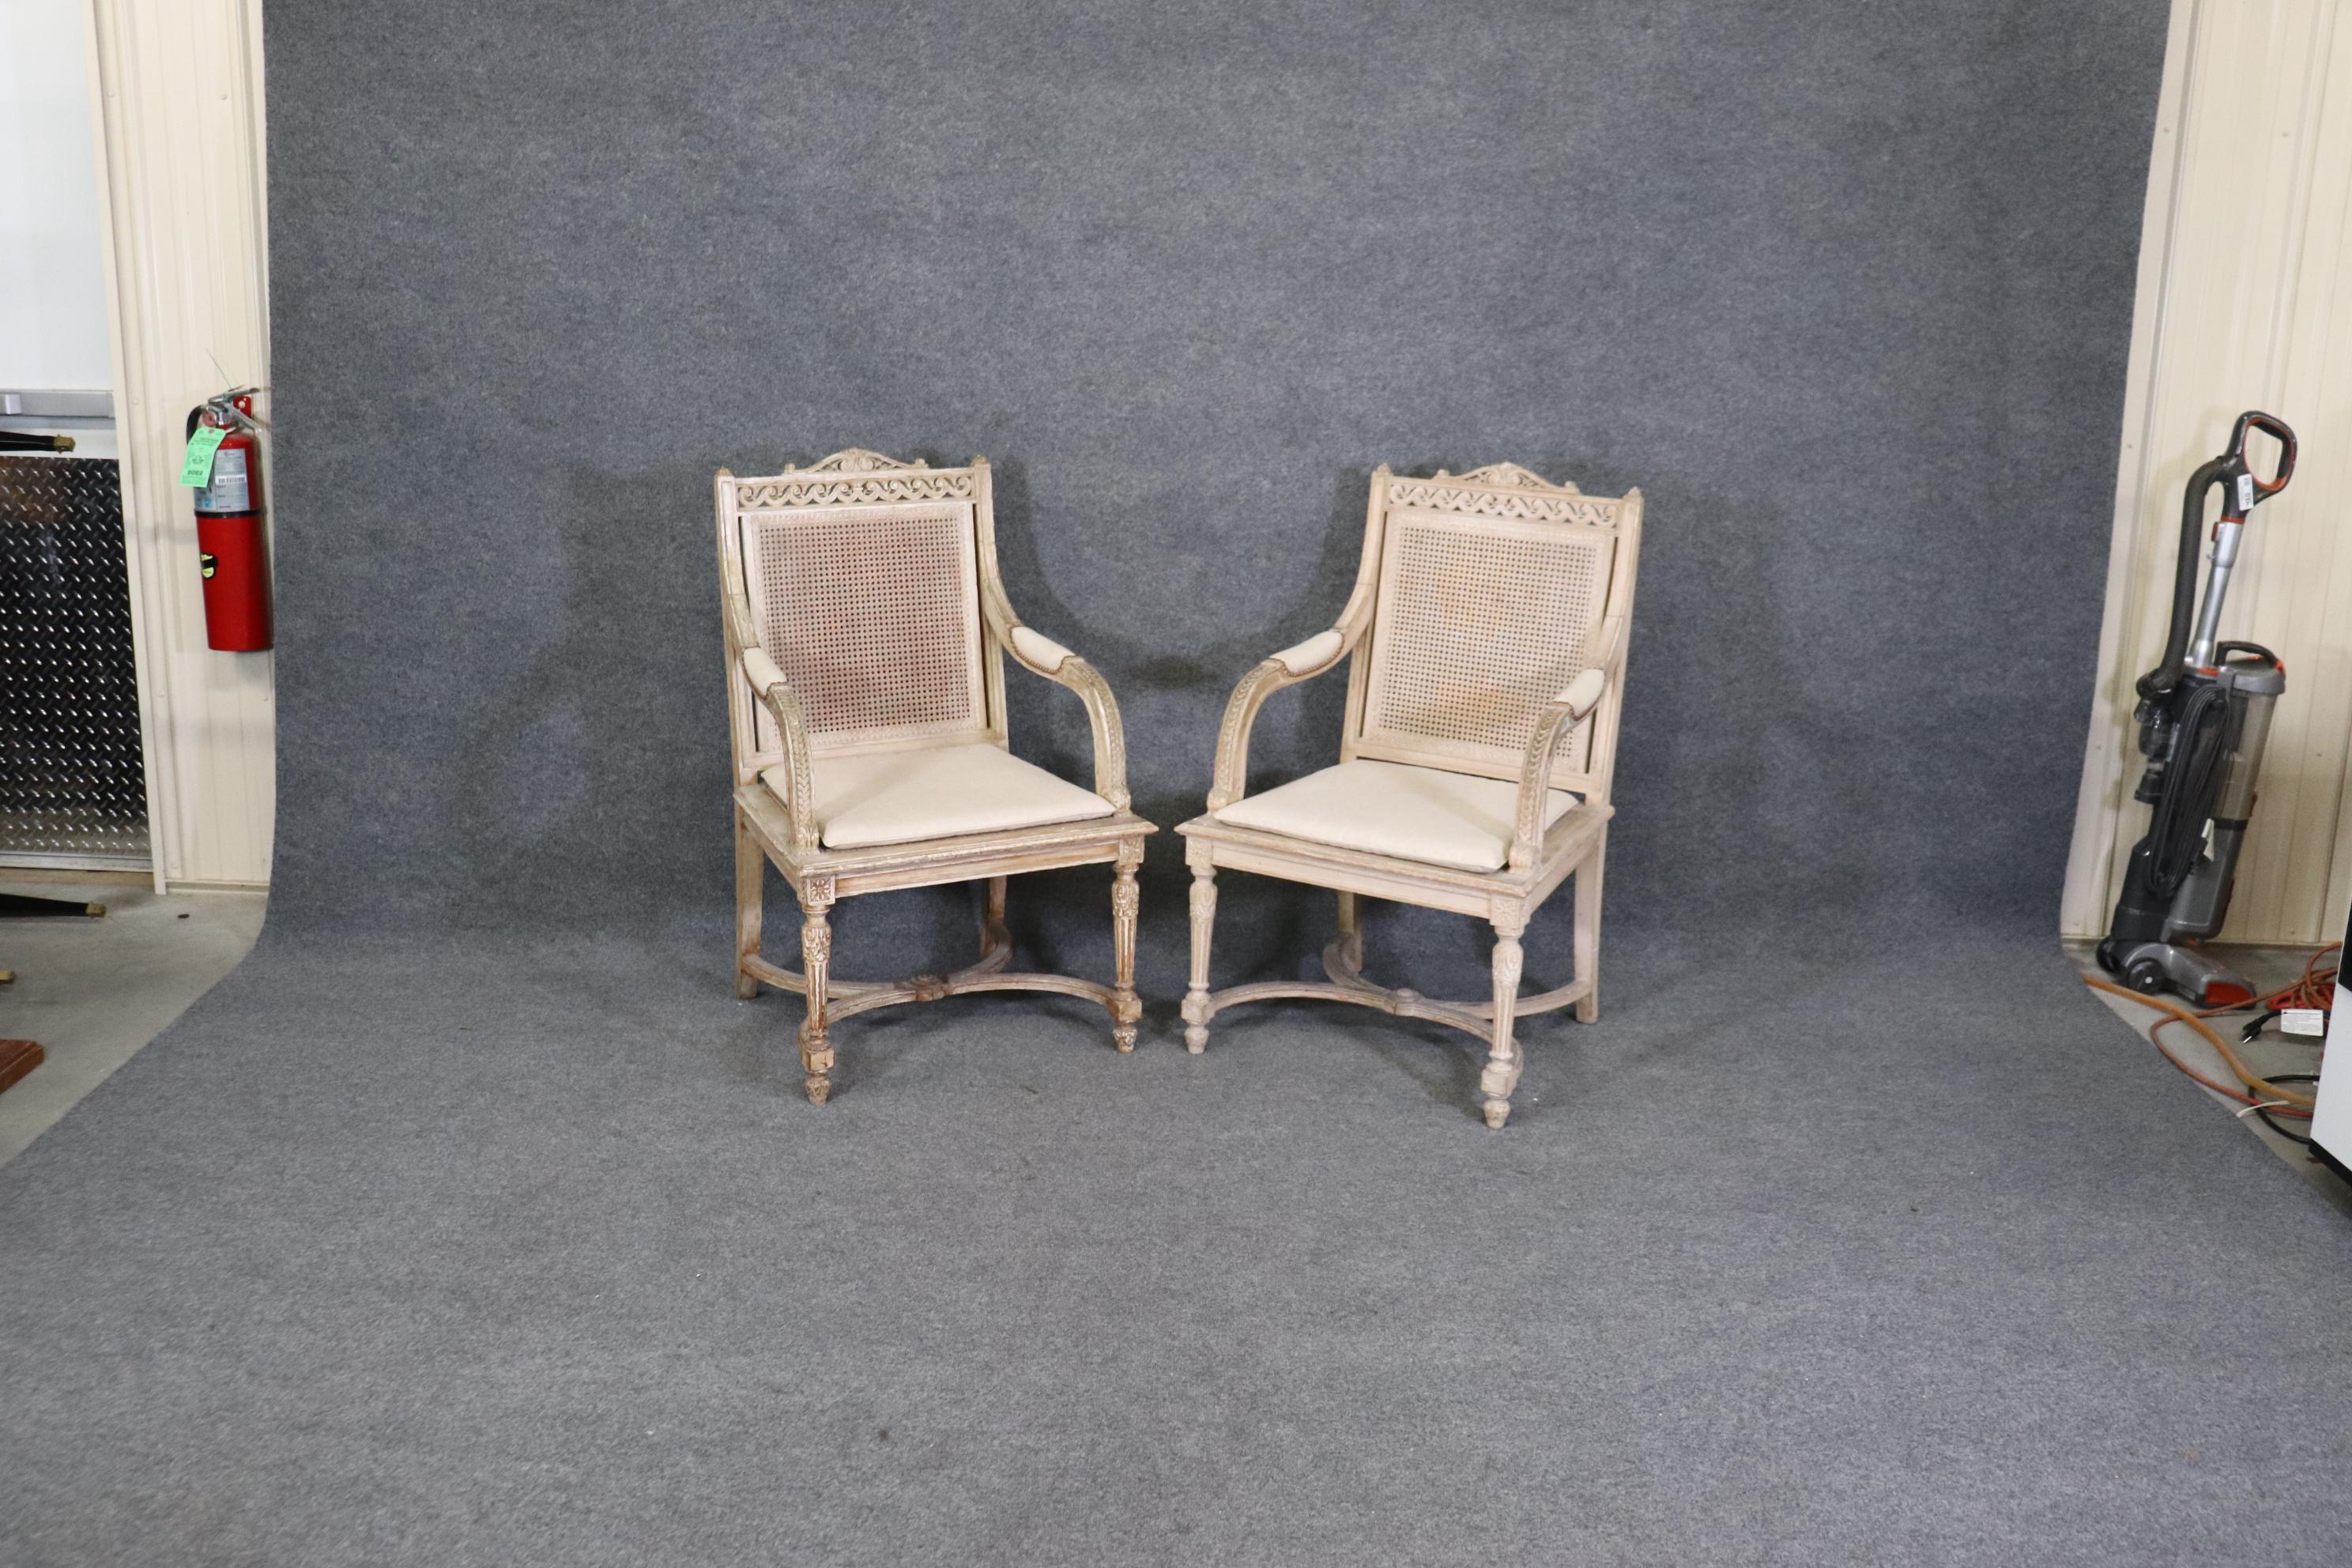 French   Pair of Cane Back Antique White Paint Decorated Louis XVI Style Armchairs Dini For Sale